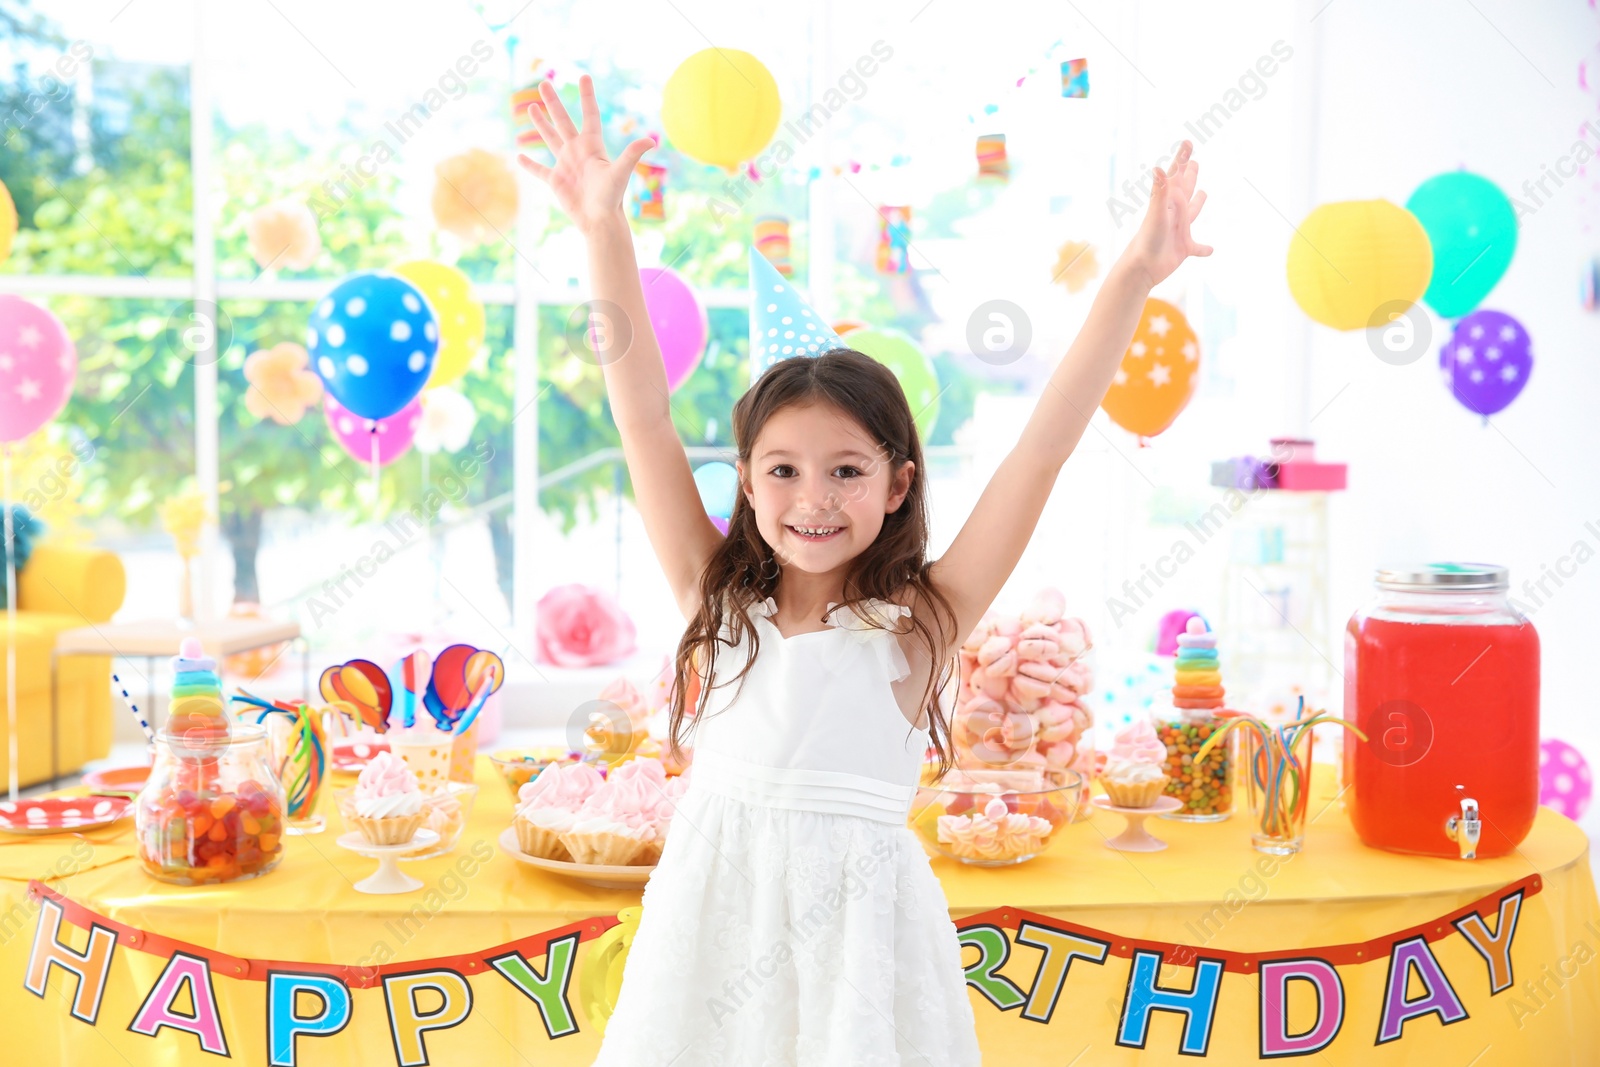 Photo of Cute little girl near table with treats at birthday party indoors